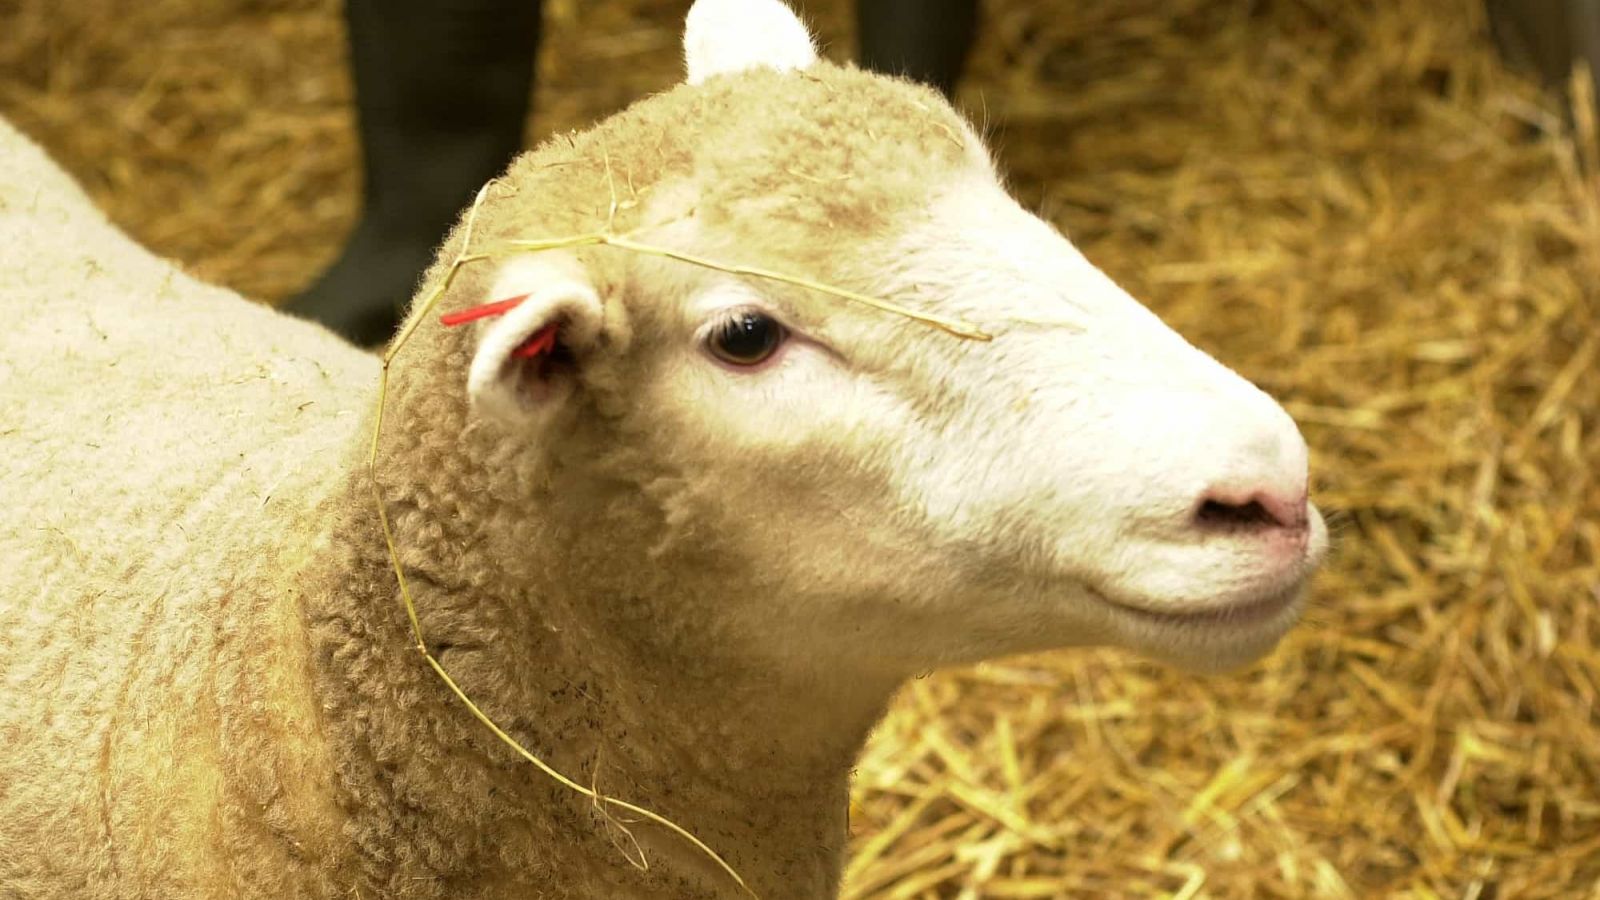 20 years since Dolly the Cloned Sheep